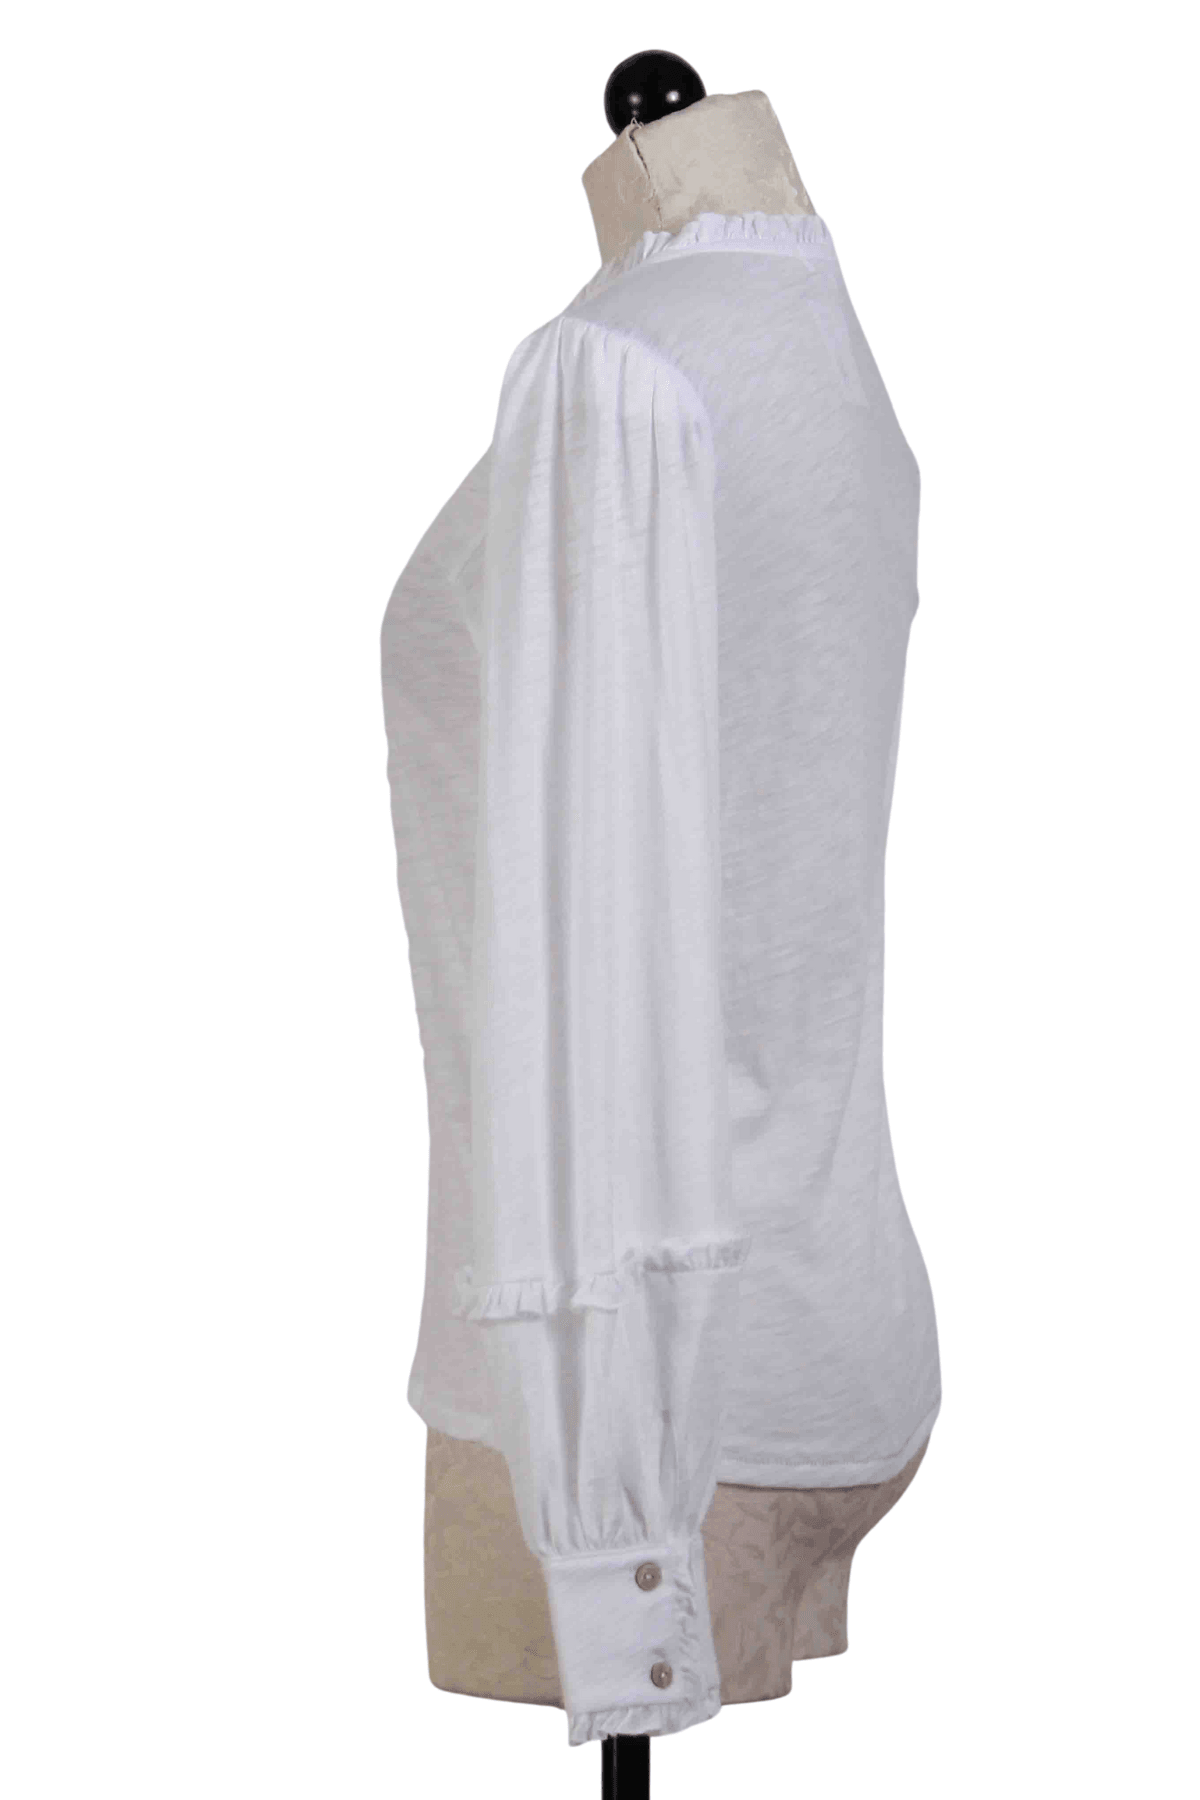 side view of white Long Sleeve Ruffle Crew Neck Tee by Goldie Tees with a Double Later Cuff